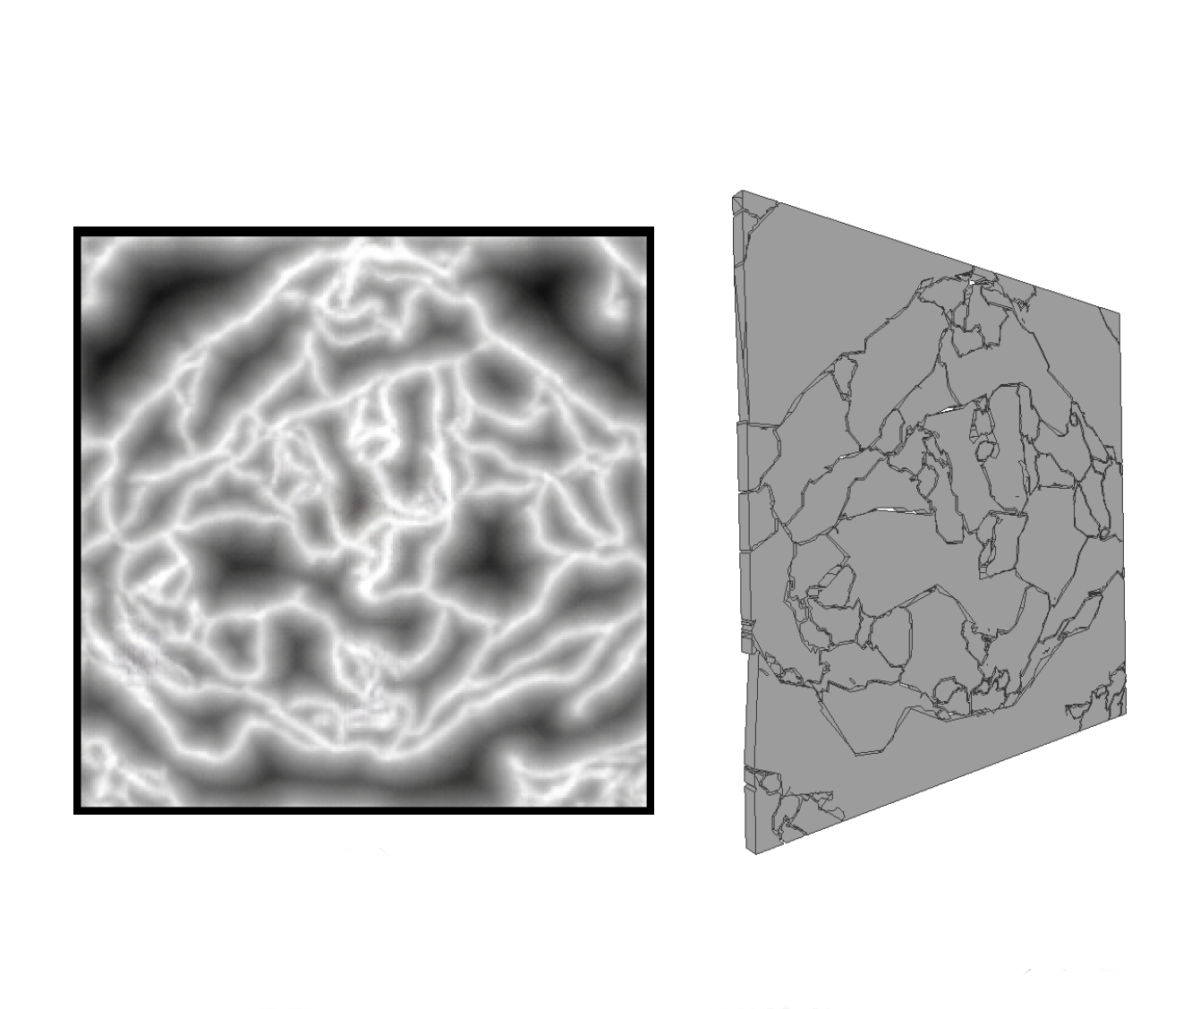 Brittle Fracture Shape Generation of 2D Planes Using Deep Learning